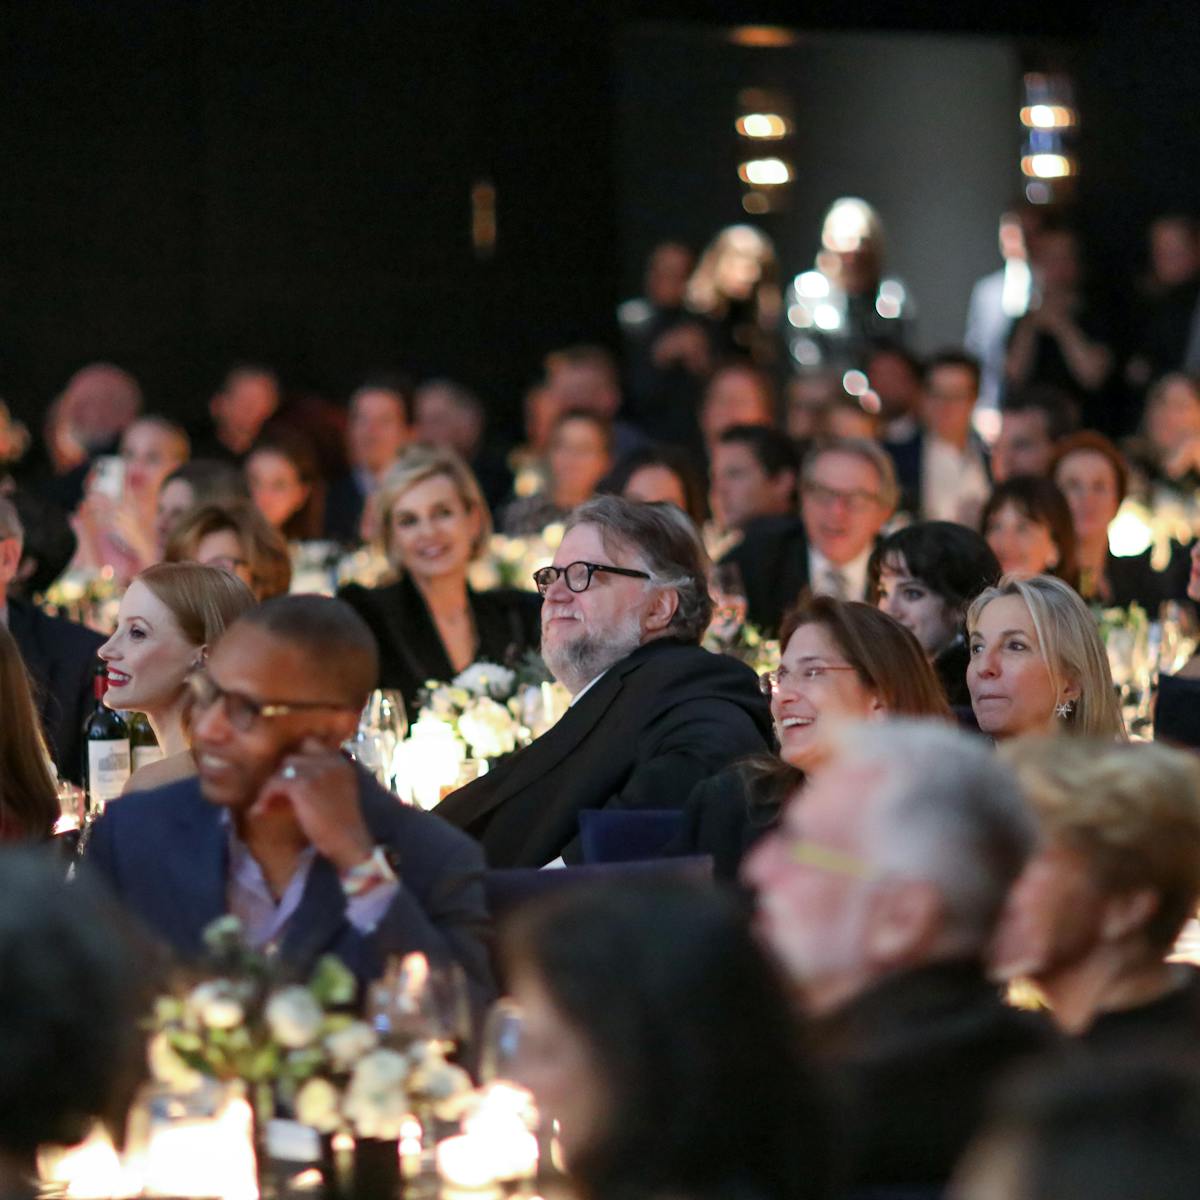 A smiling crowd of people, with Guillermo del Toro sitting at the center. The tables are alight with candles and flowers, and people are all looking at something offscreen.